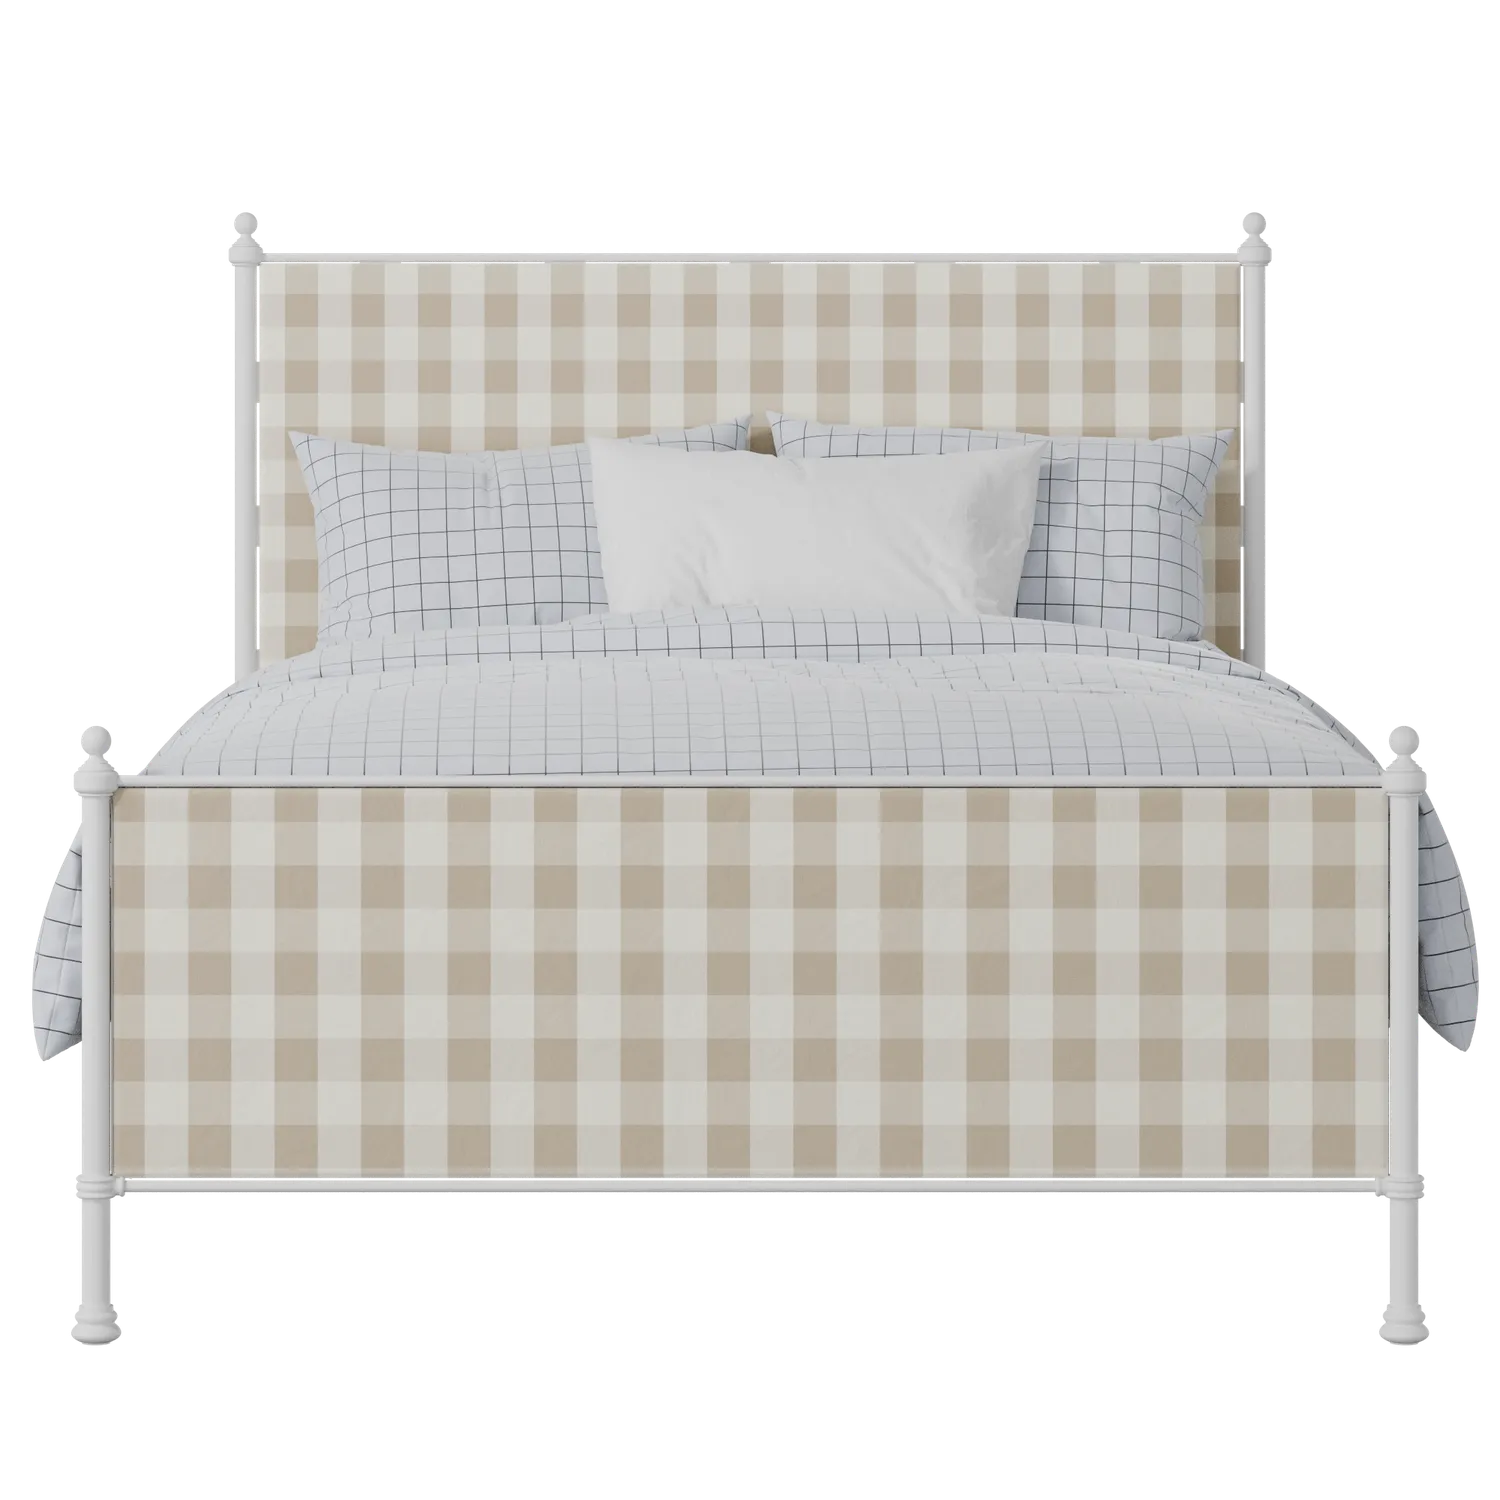 Neville iron/metal upholstered bed in white with grey fabric